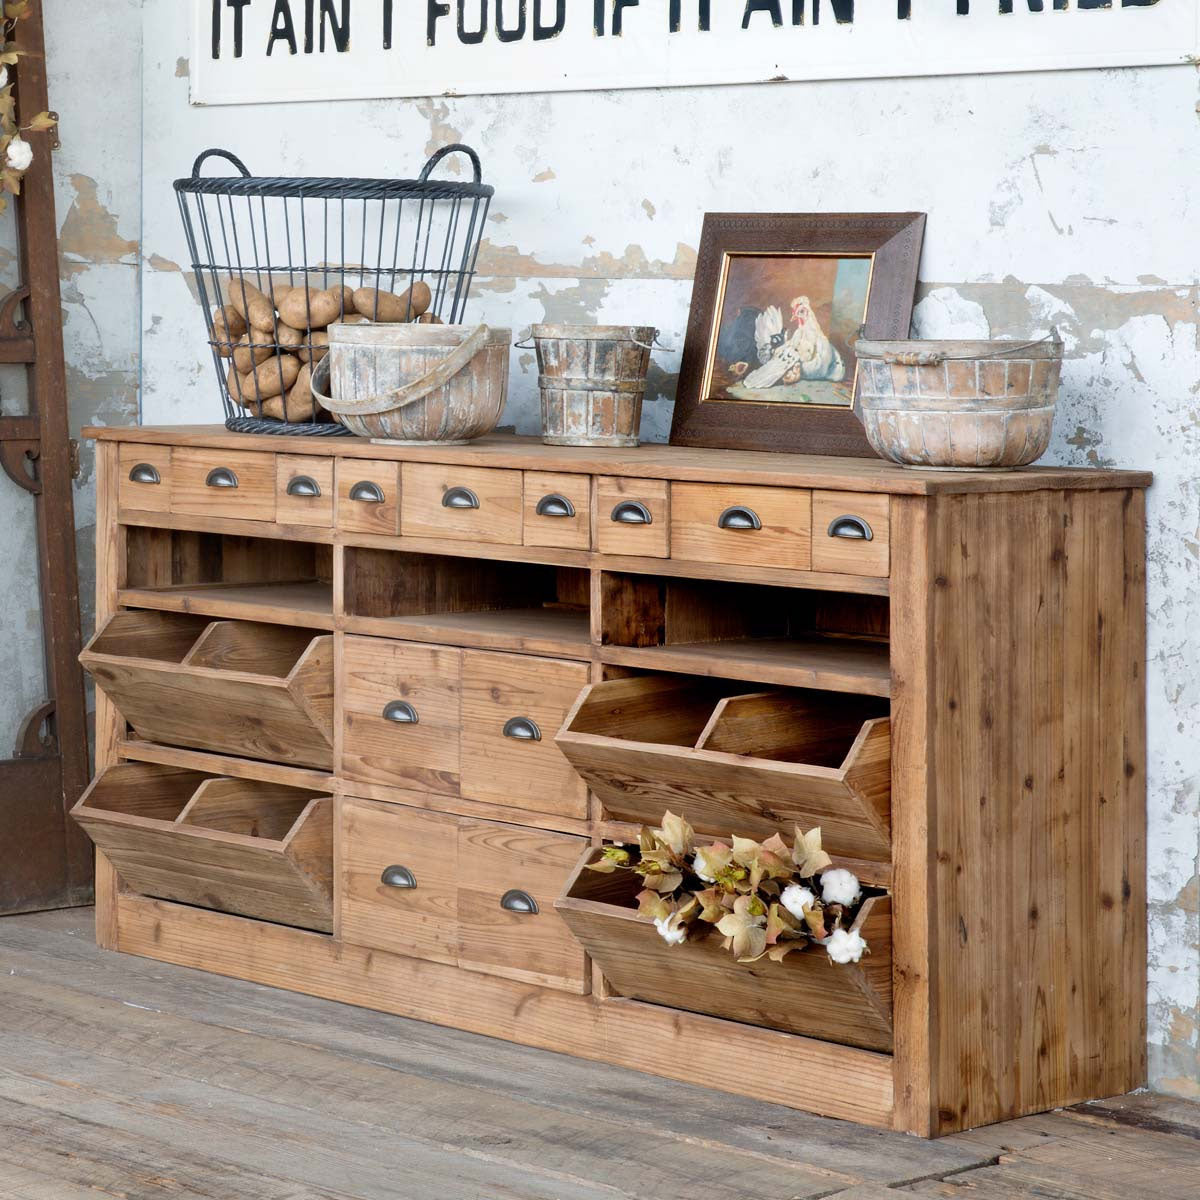 Reclaimed Wood Pantry Counter - More Coming!